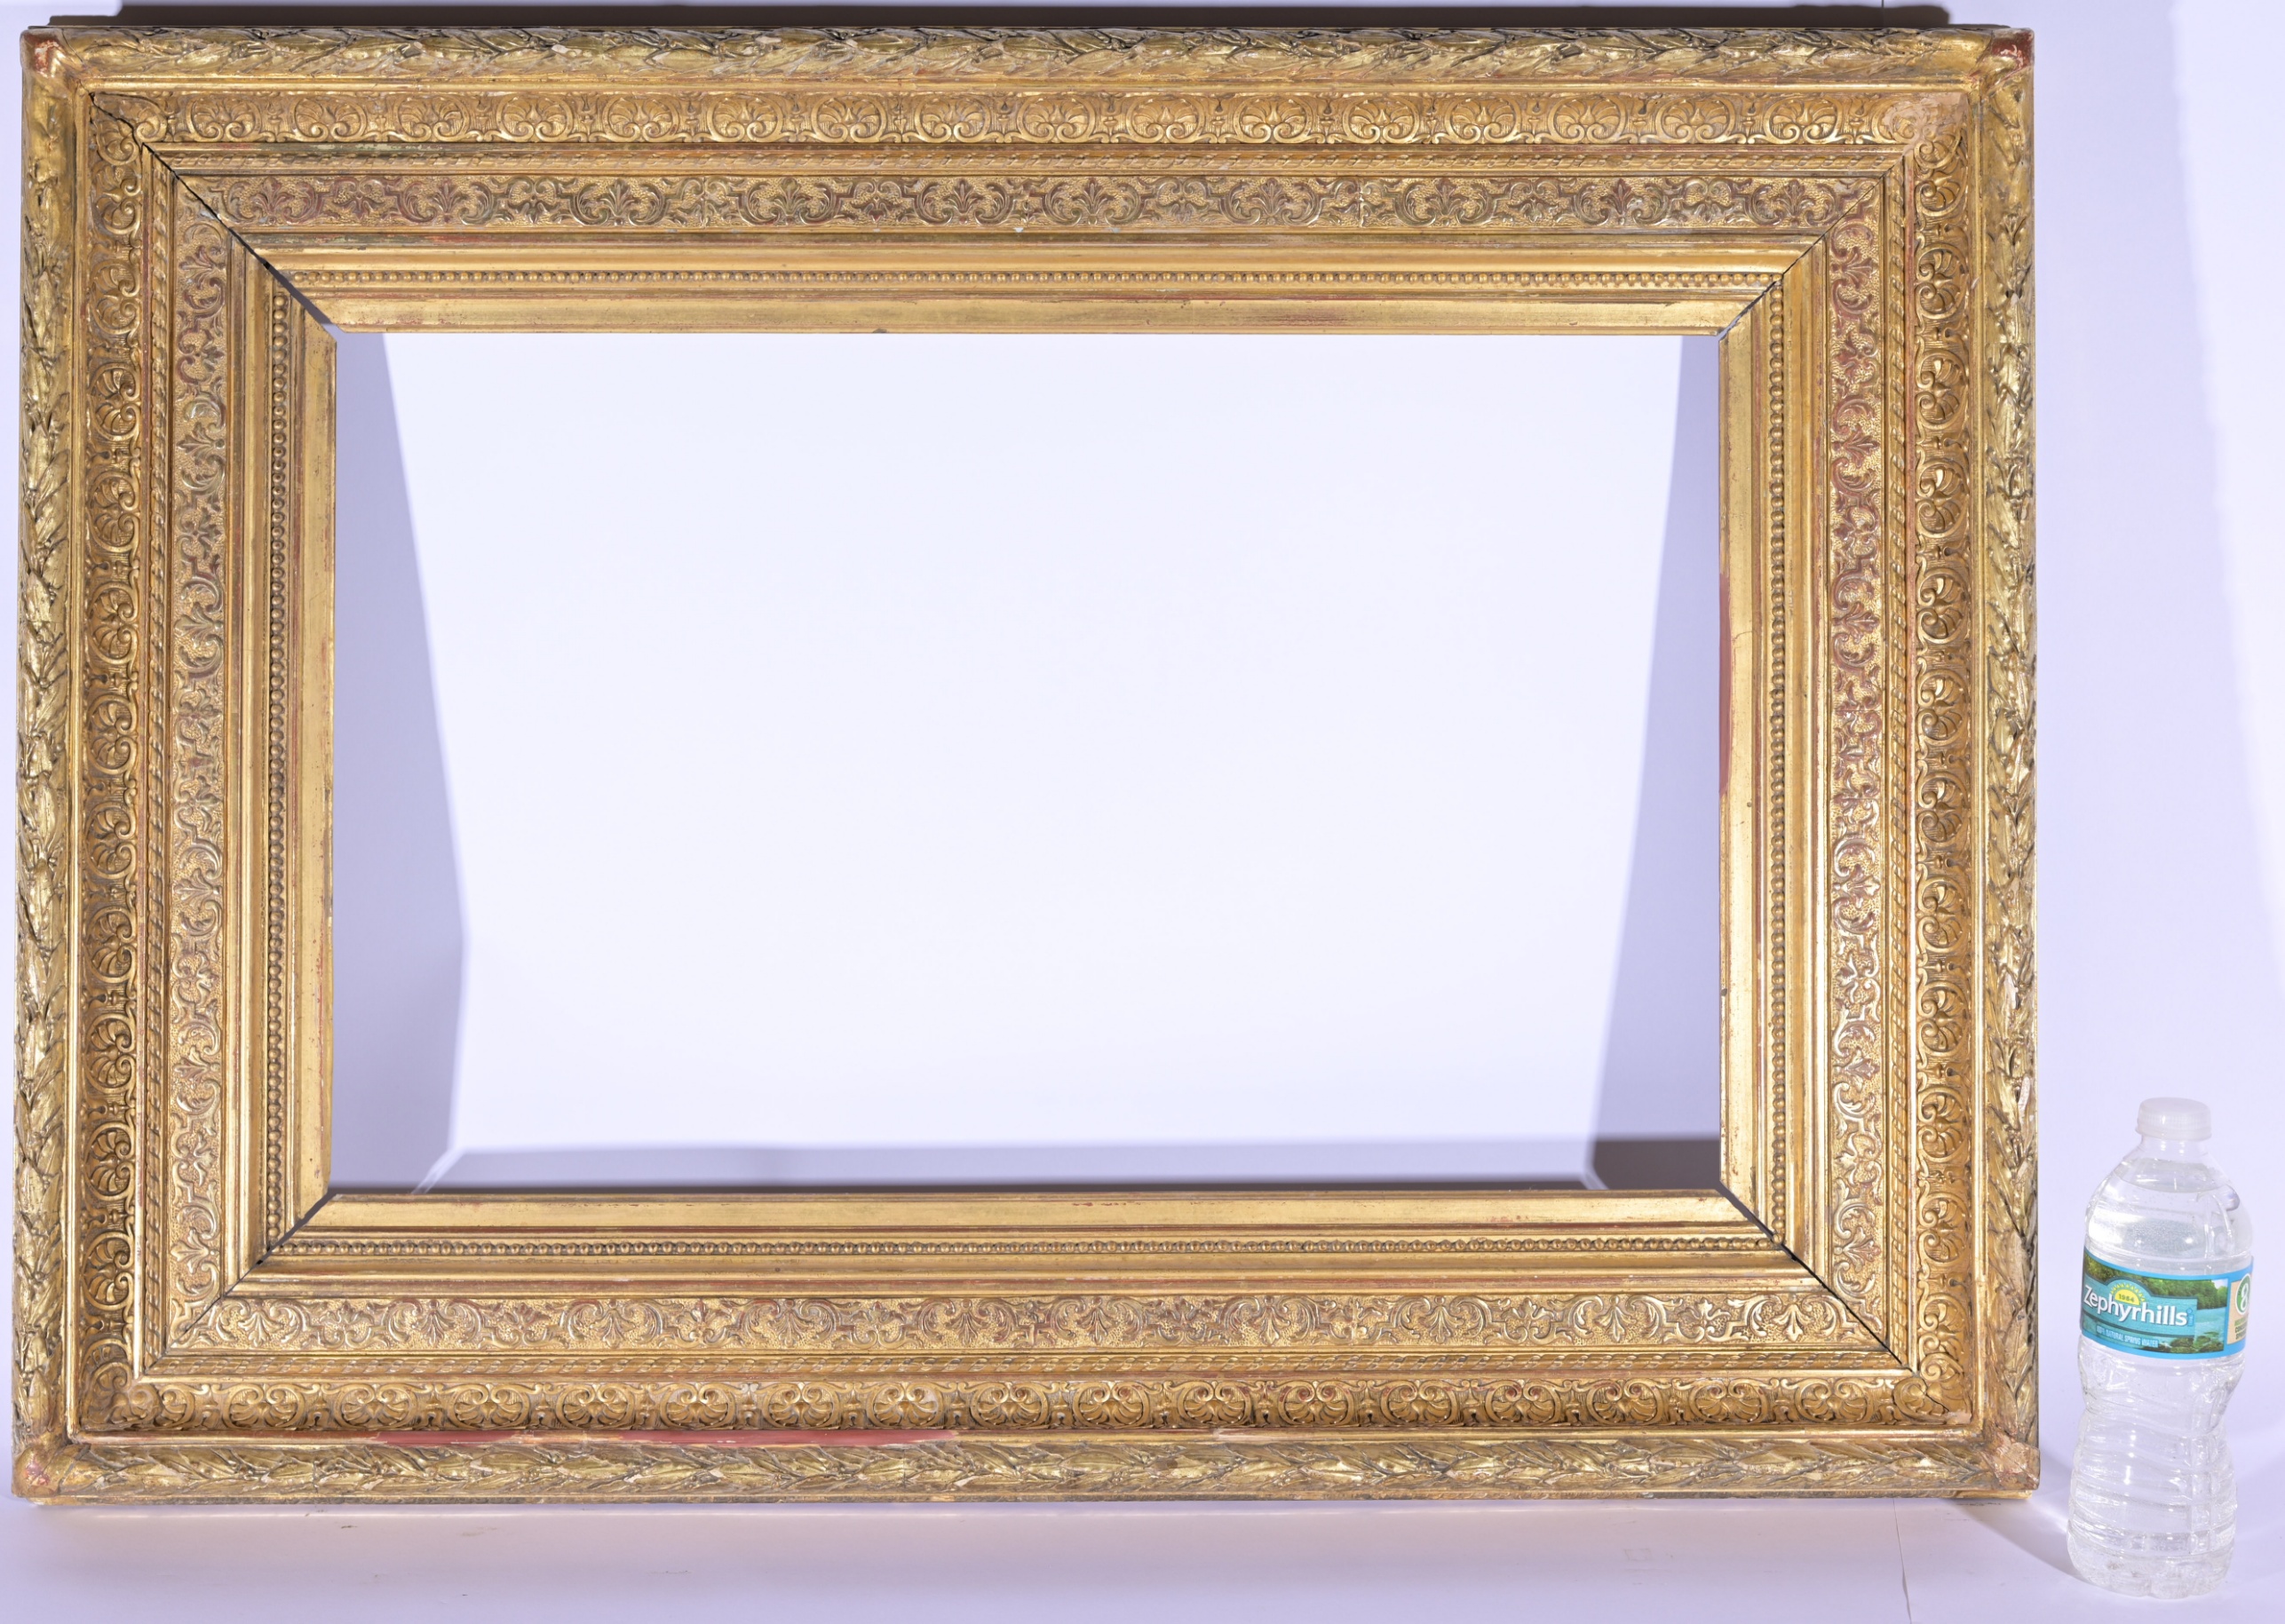 Exceptional 1860's French Gilt Frame - 16 x 24.5 - Image 2 of 11